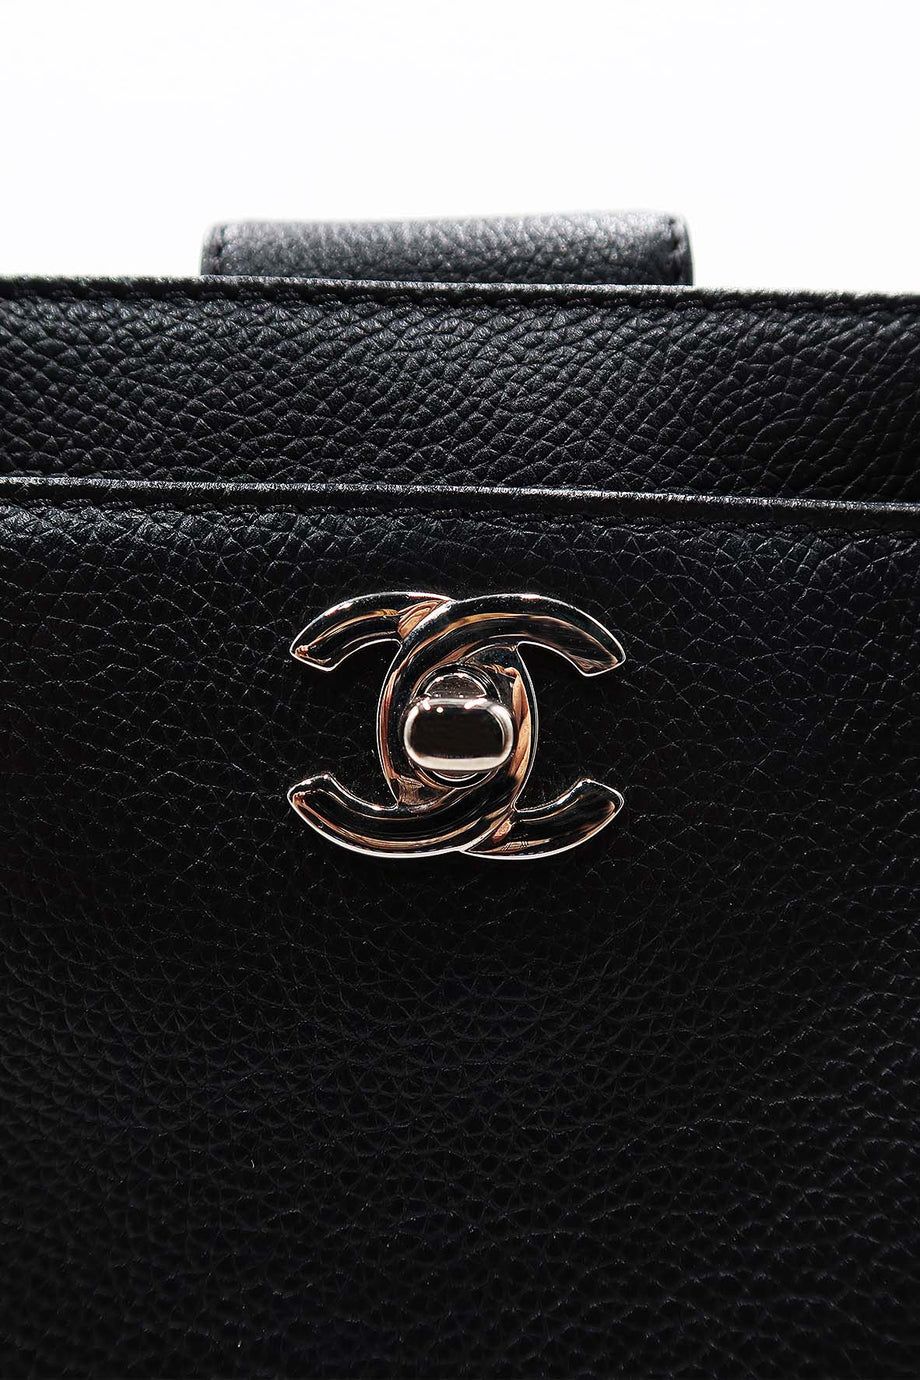 THATSLUXE REVIEW & WIMB: CHANEL EXECUTIVE CERF TOTE 